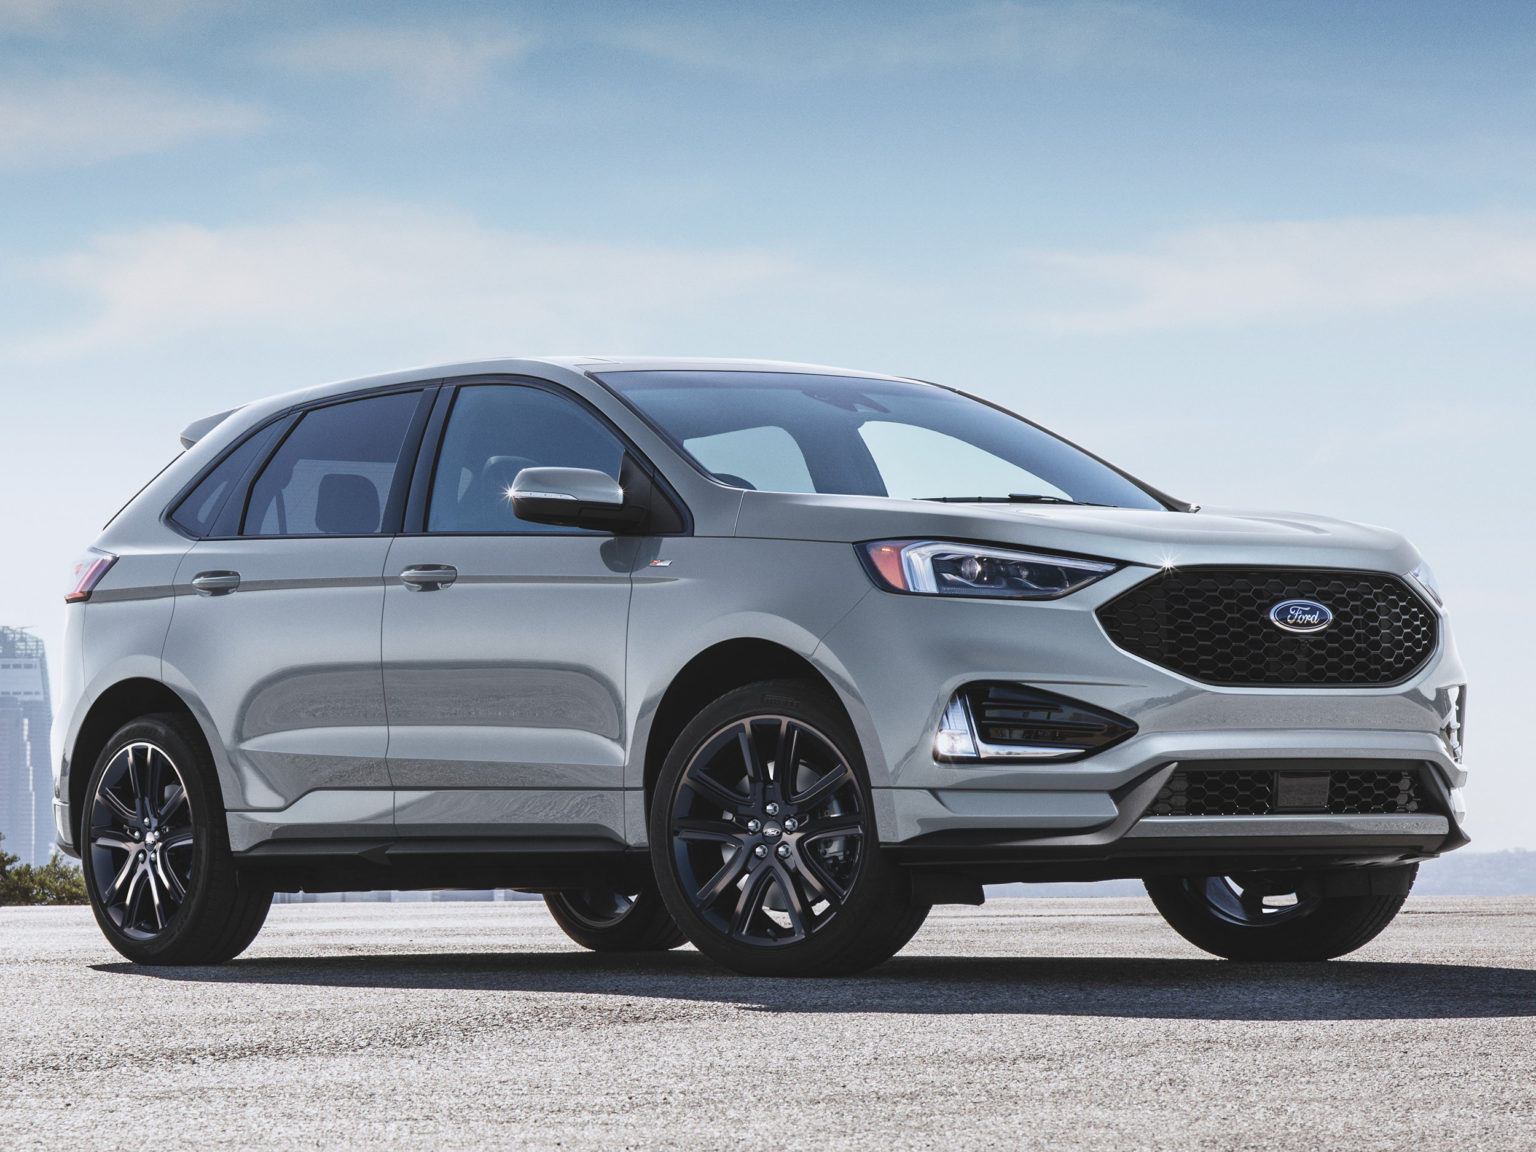 Ford is plugging a hole in its lineup with a new appearance-focused model.